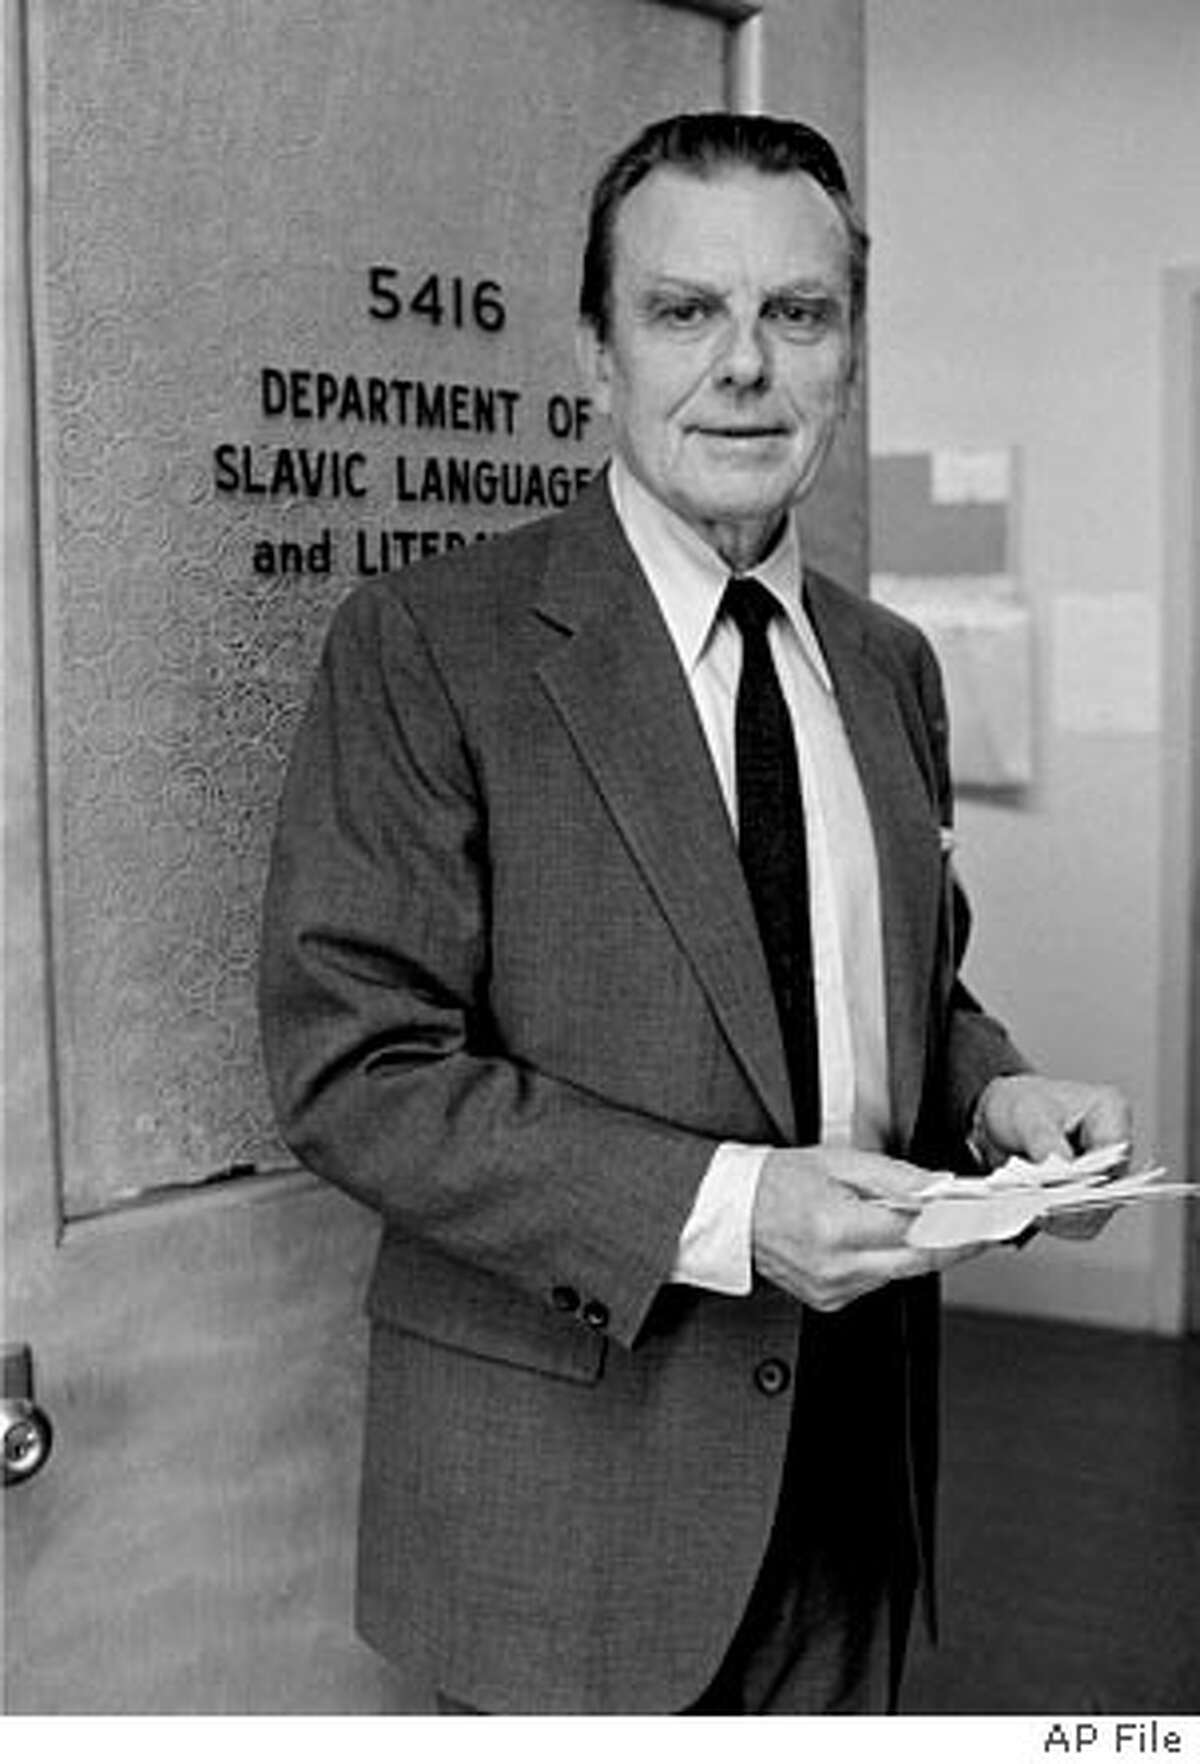 *** FILE *** Nobel Prize winner for literature Czeslaw Milosz poses at his office at the University of California in this Thursday, Oct. 10, 1980 file photo. The Polish poet and Nobel laureate Czeslaw Milosz, known for his intellectual and emotional works about some of the worst cruelties of the 20th century, died Saturday, the Polish news agency PAP reported. He was 93. (AP Photo)